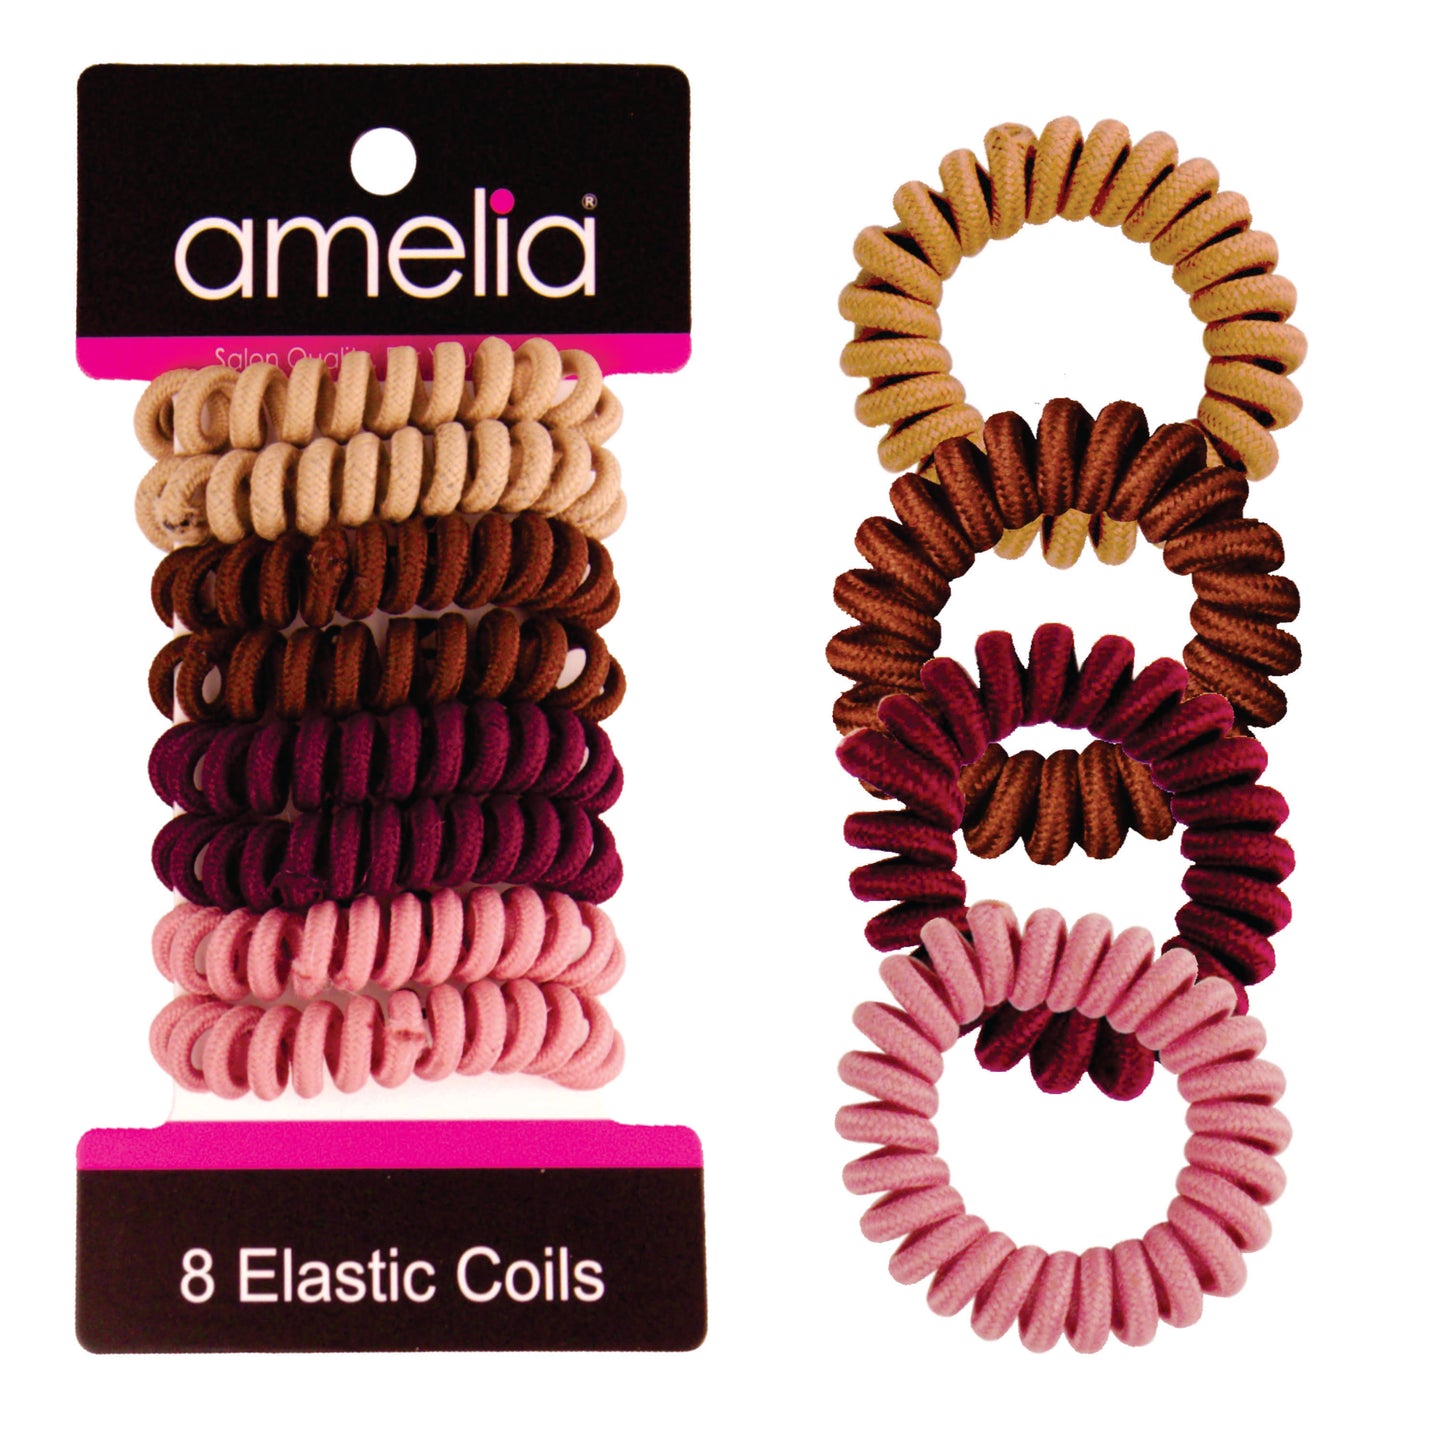 Amelia Beauty, 8 Small Fabric Wrapped Elastic Hair Coils, 1.75in Diameter Spiral Hair Ties, Gentle on Hair, Strong Hold and Minimizes Dents and Creases, Autumn Blend